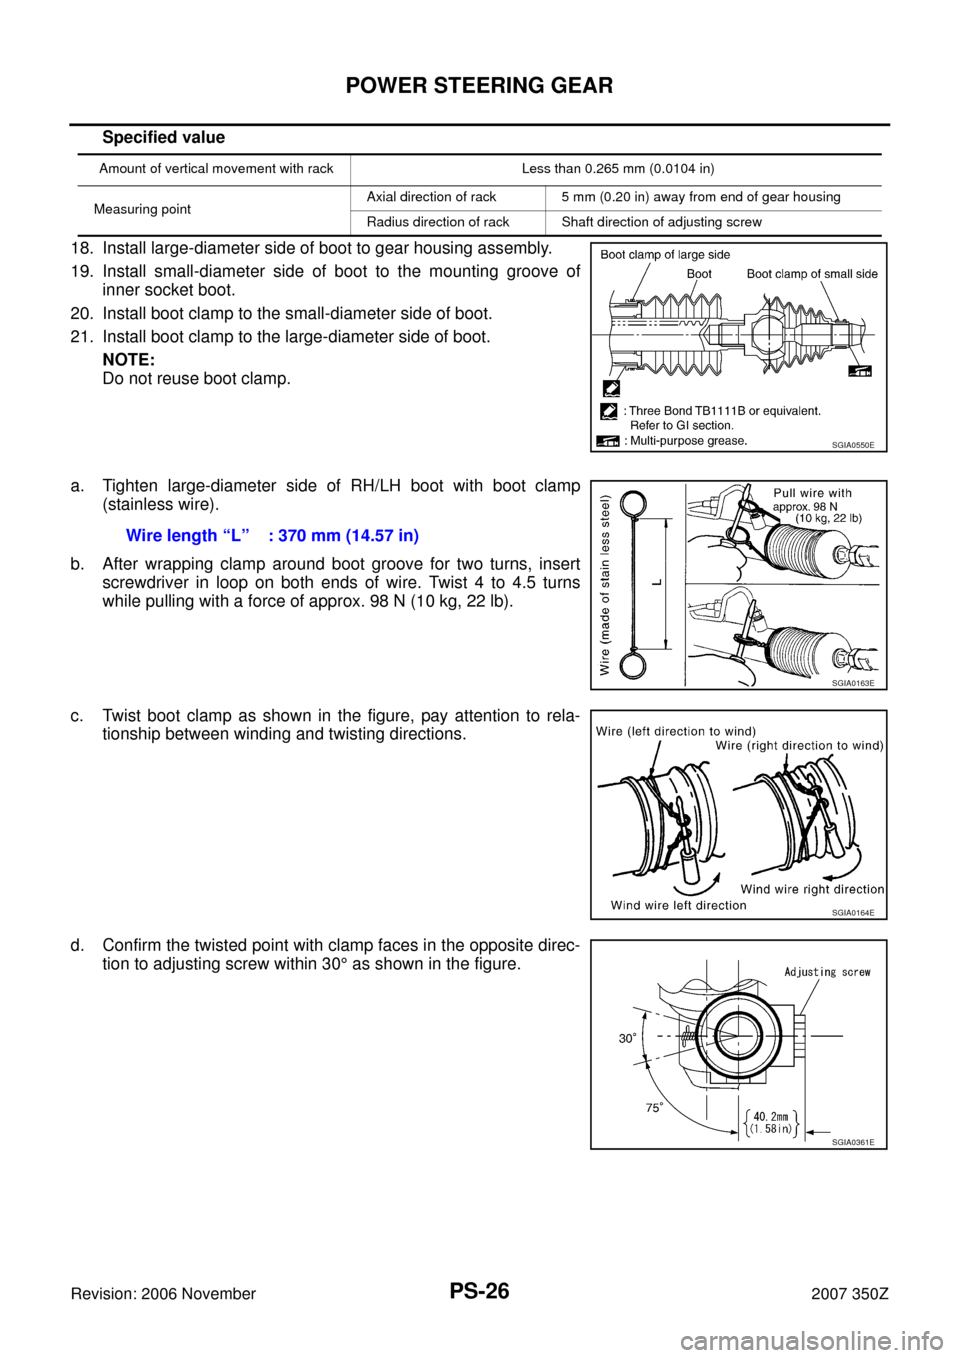 NISSAN 350Z 2007 Z33 Power Steering System Owners Manual PS-26
POWER STEERING GEAR
Revision: 2006 November2007 350Z
Specified value
18. Install large-diameter side of boot to gear housing assembly.
19. Install small-diameter side of boot to the mounting gro